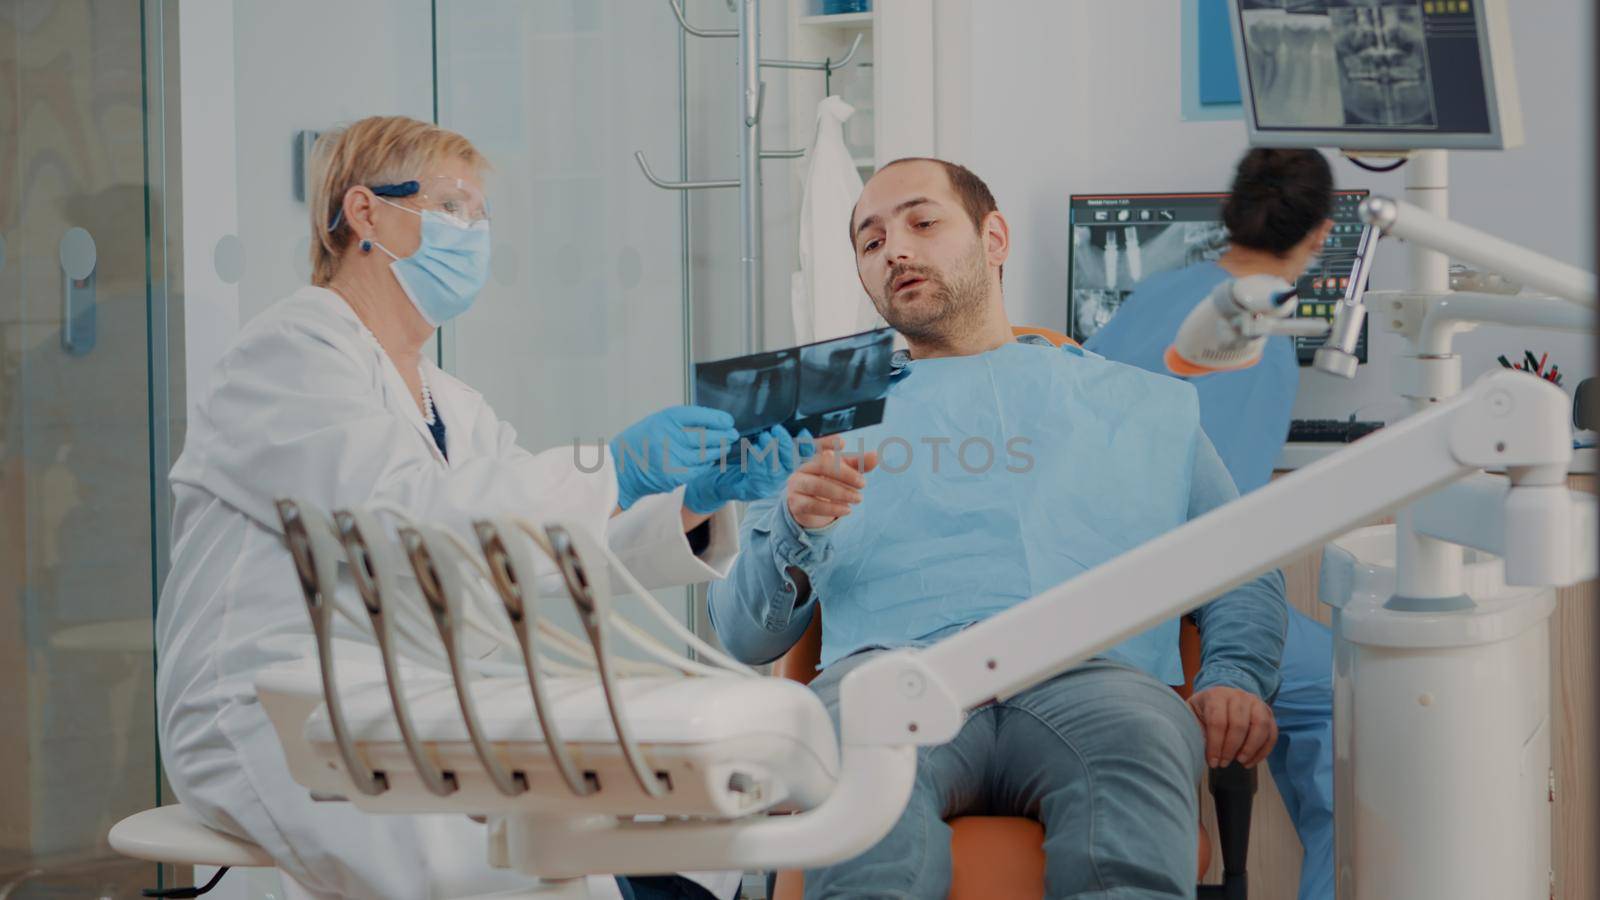 Stomatologist showing x ray scan diagnosis to patient in dentistry cabinet. Dentist holding radiography results to do oral care inspection and cure toothache. Man with caries at appointment.